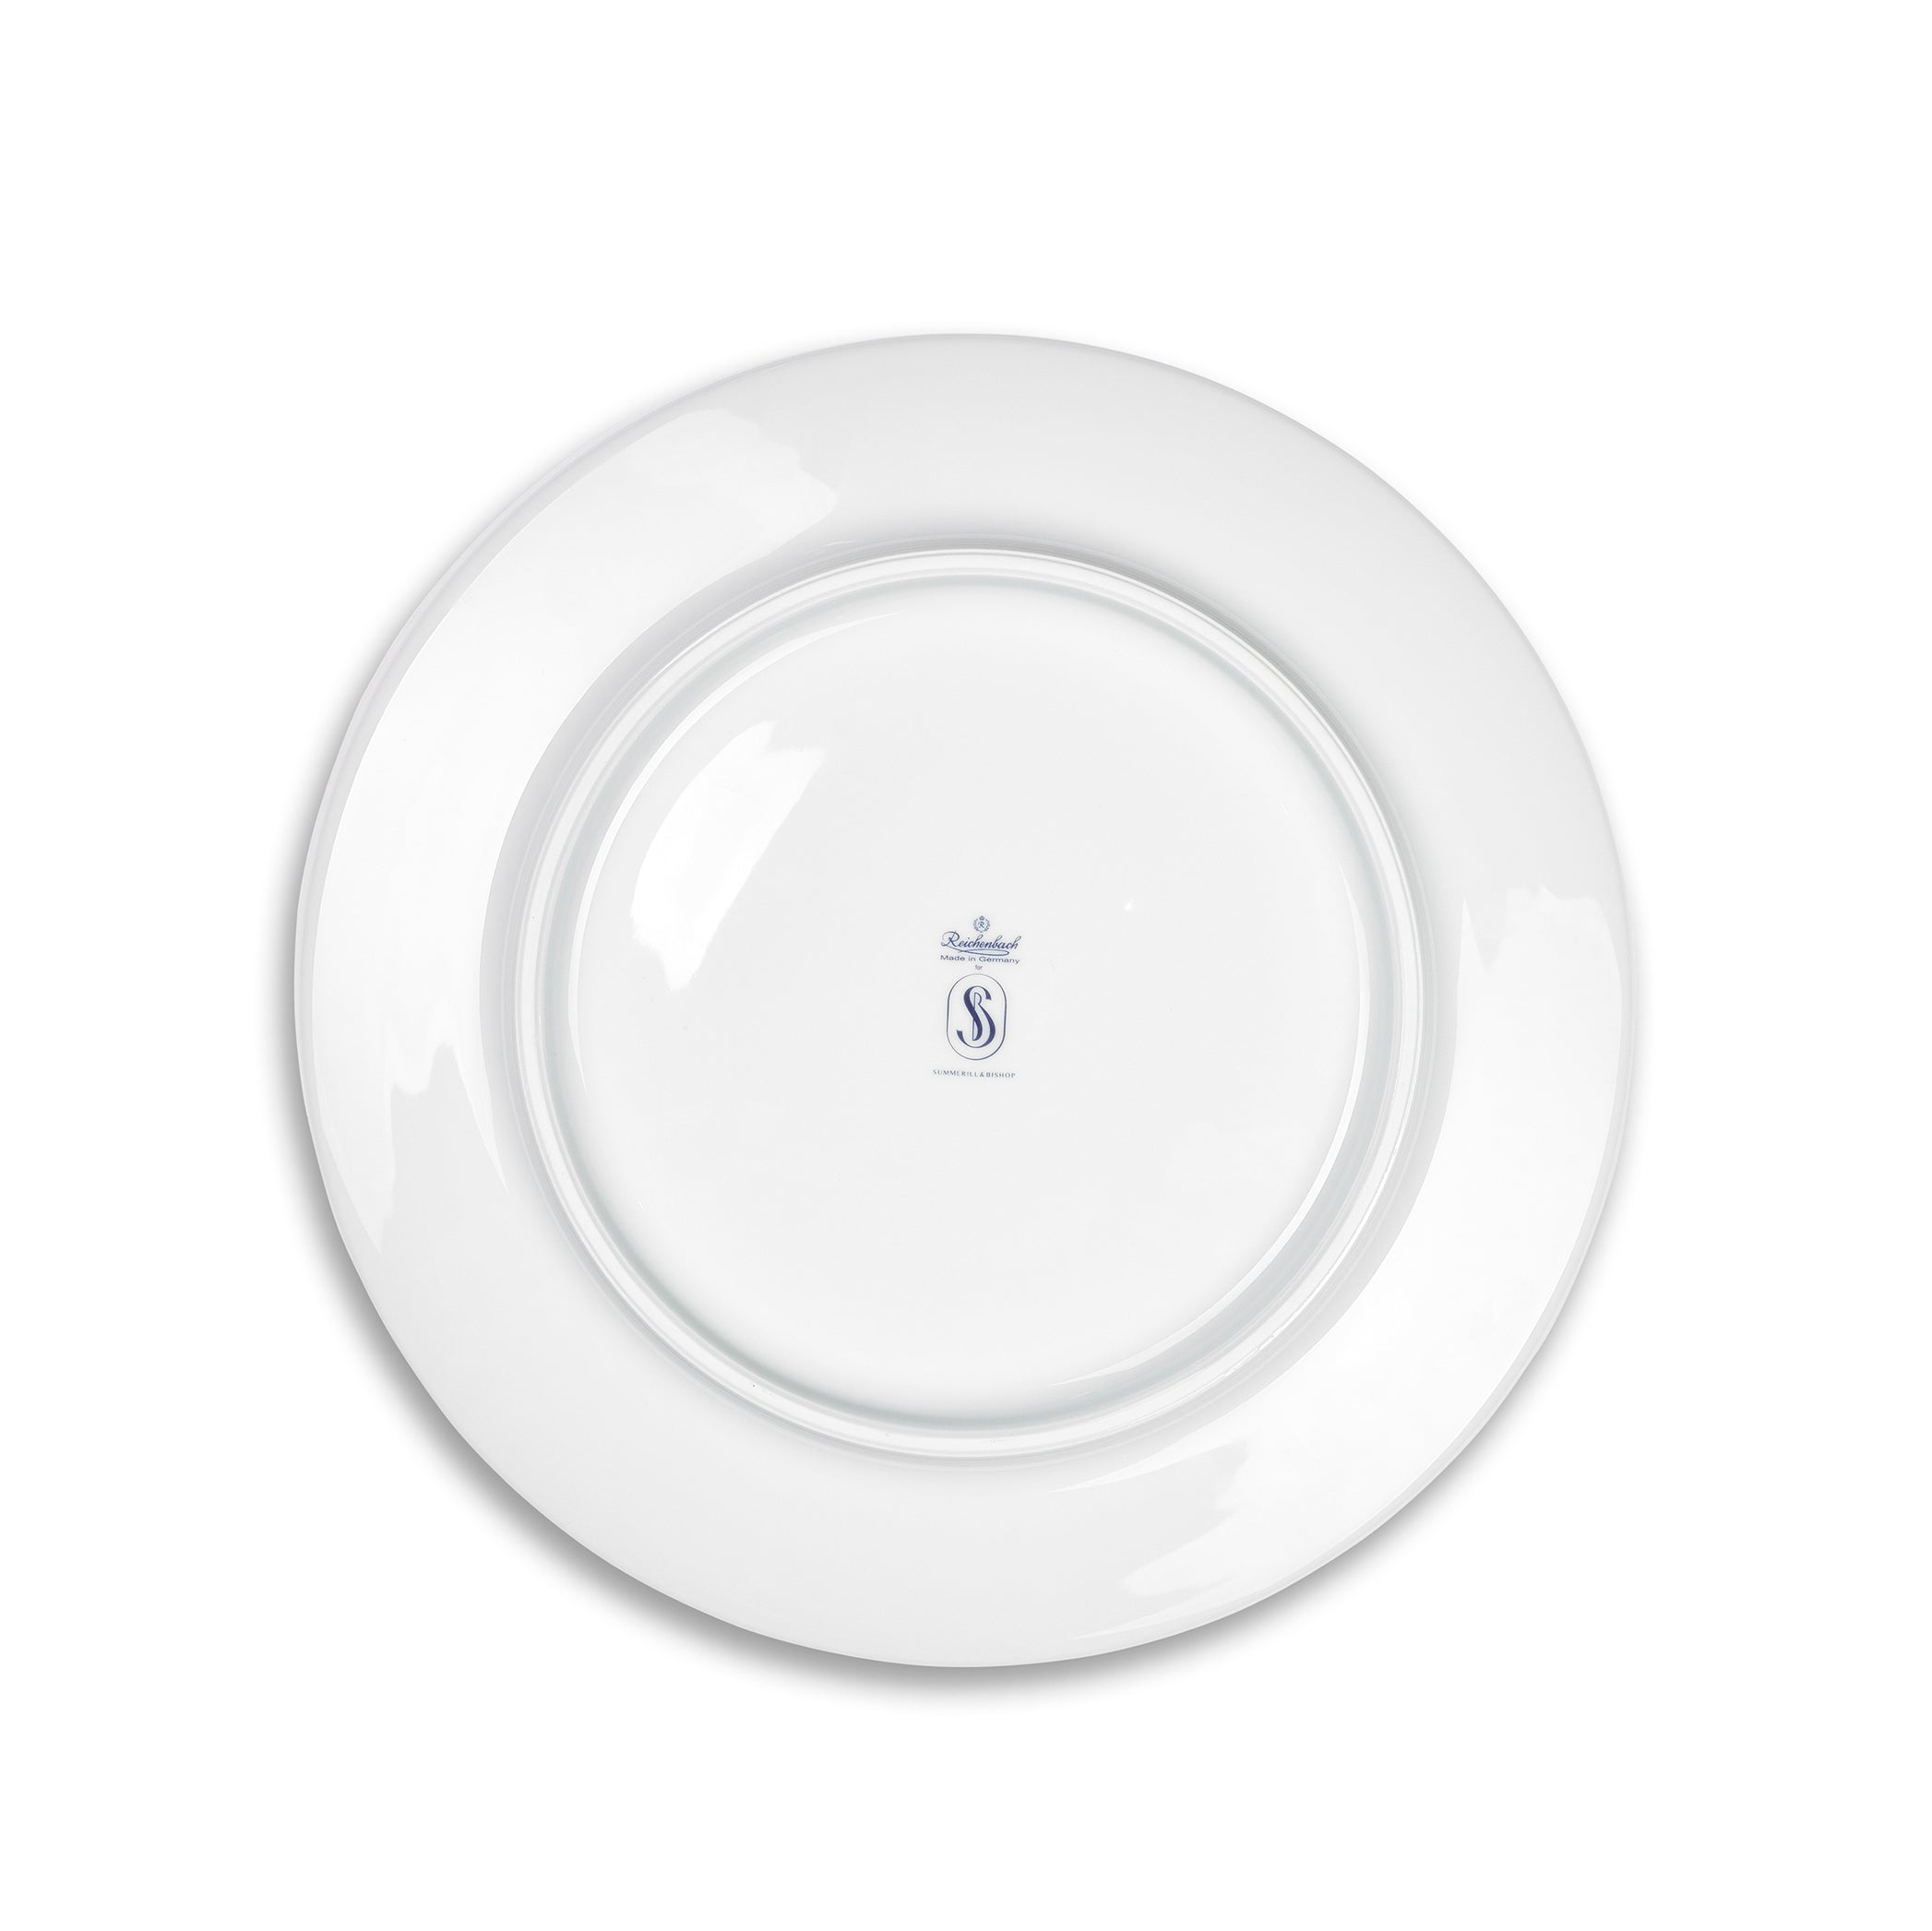 S&B 33cm Porcelain Charger with Blue Edge